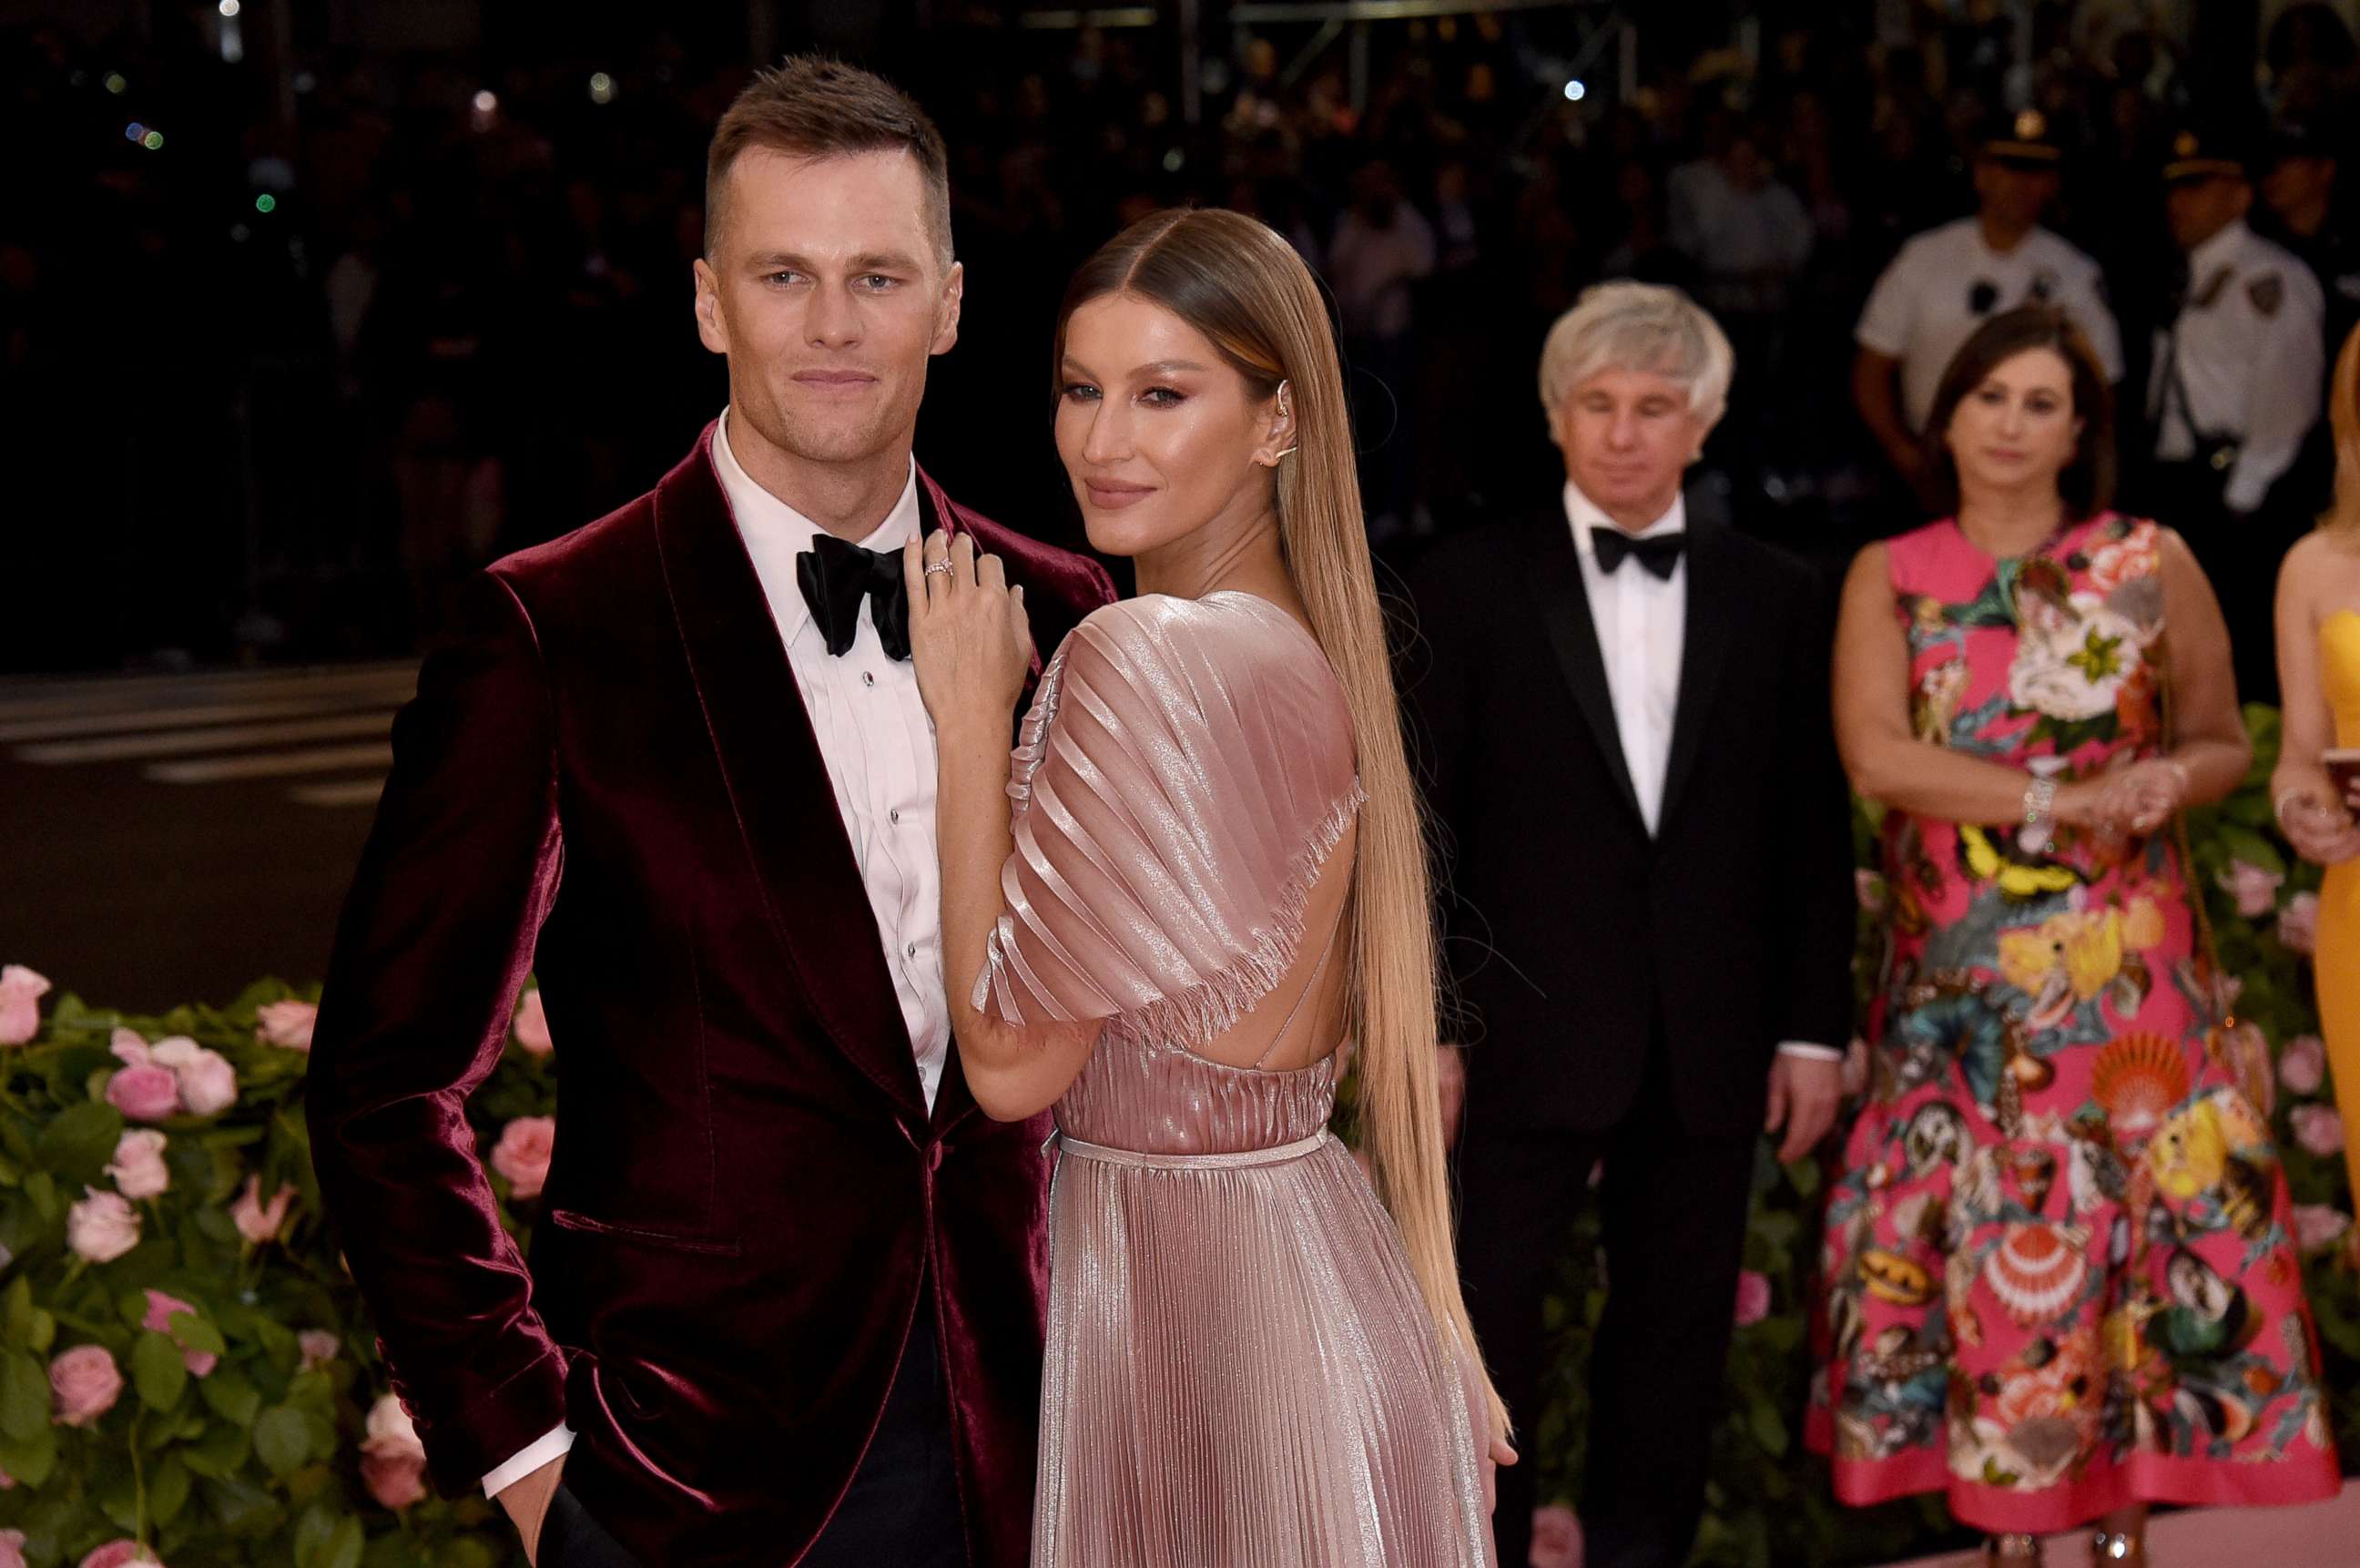 PHOTO: Tom Brady and Gisele Bundchen attend The 2019 Met Gala Celebrating Camp: Notes on Fashion at Metropolitan Museum of Art on May 06, 2019, in New York City.